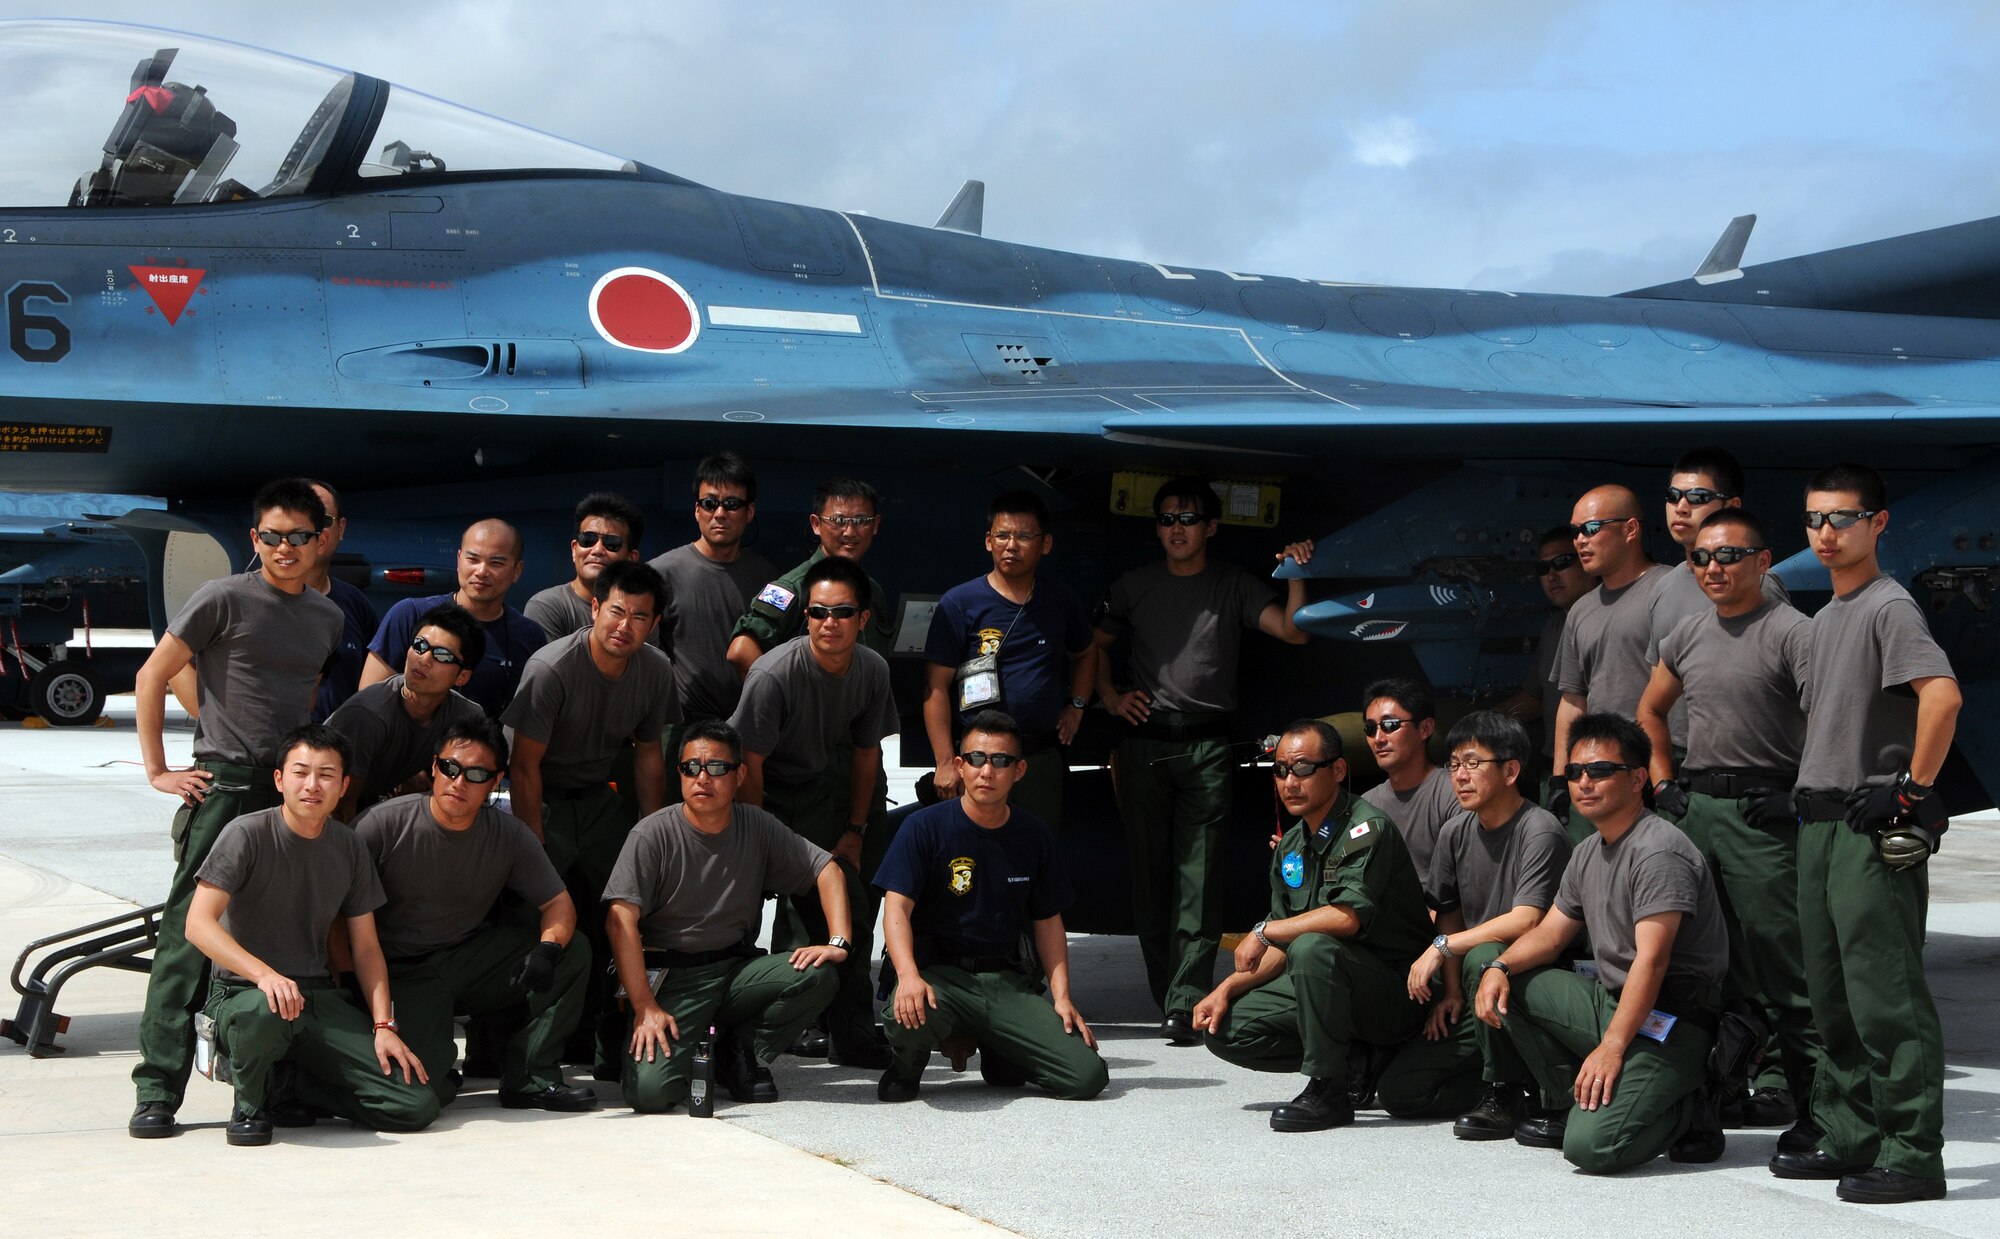 ANDERSEN AIR FORCE BASE, Guam - Japan Air Self Defense Force gather together for a quick group photo on the flightline here in front of their own F2-X fighter jet from the 6th Squadron, Tsuiki Air Base, Japan Feb. 5. JASDF squadrons are participating in Cope North, an exercise designed to enhance U.S. and Japanese air operations in defense of Japan. (U.S. Air Force photo by Airman 1st Class Courtney Witt)(released)

